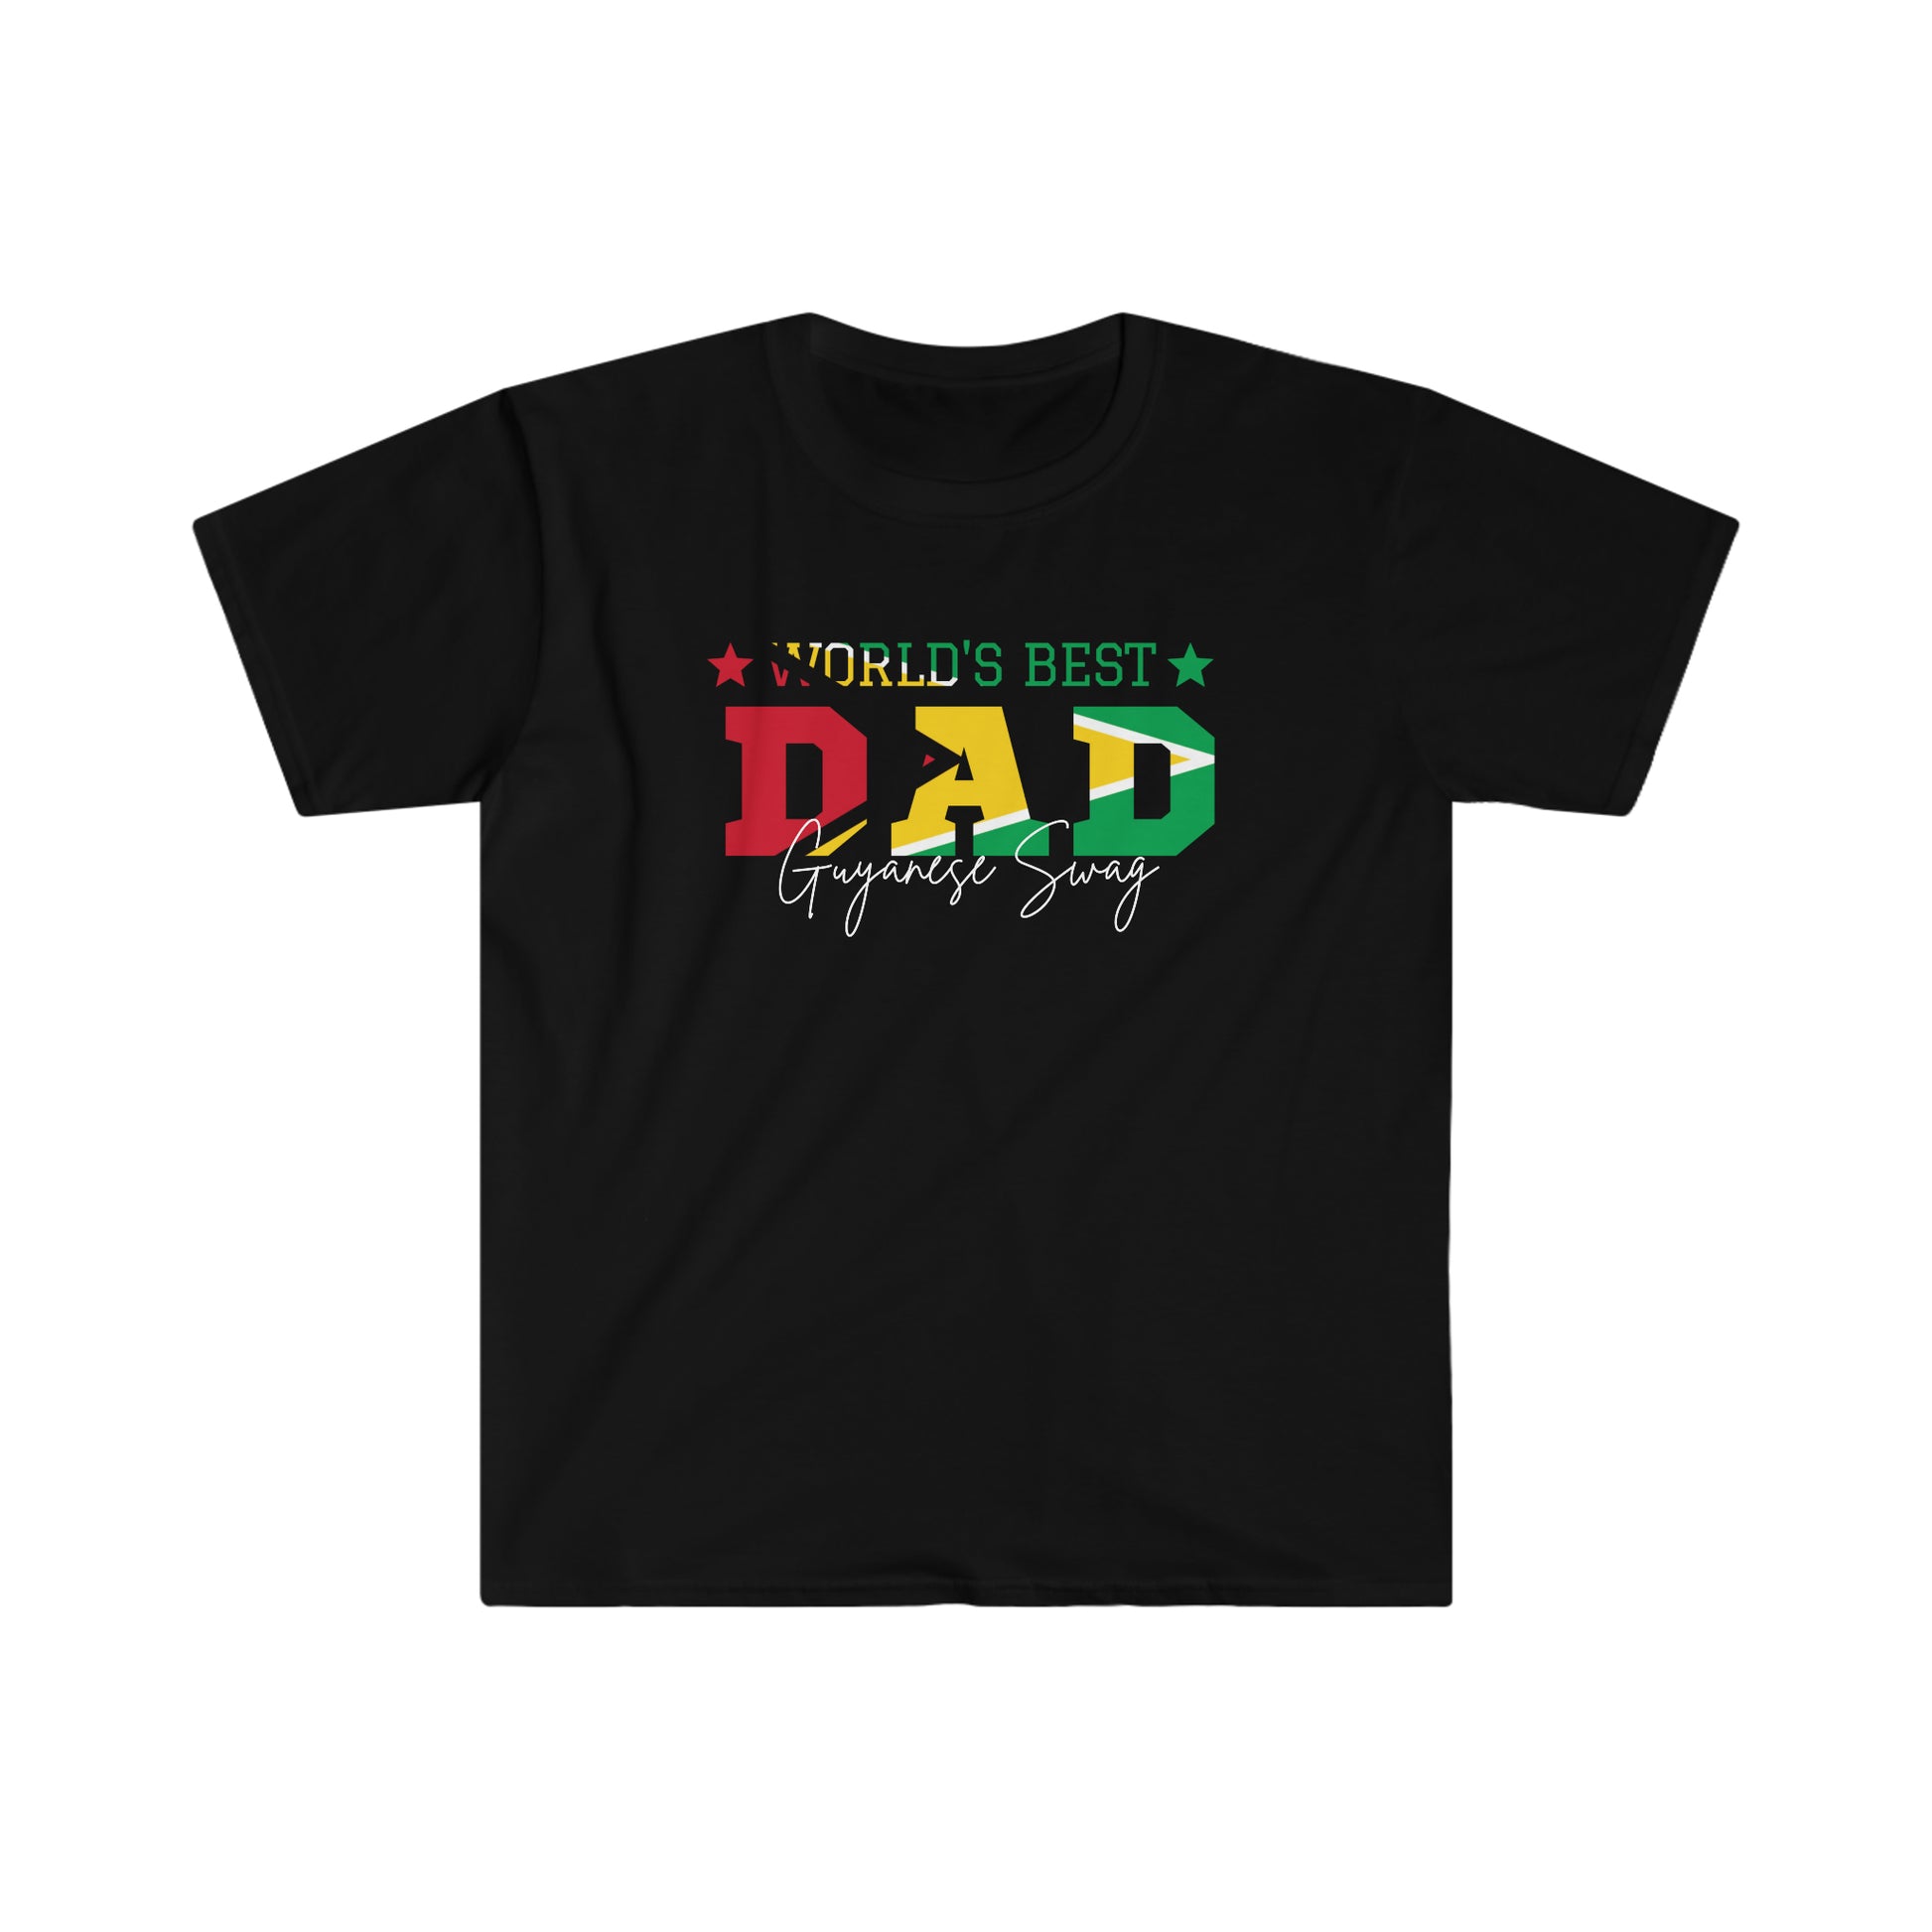 Guyanese Swag World's Best Dad Father's Day Men Soft Style Shirt Sleeve T-Shirt.